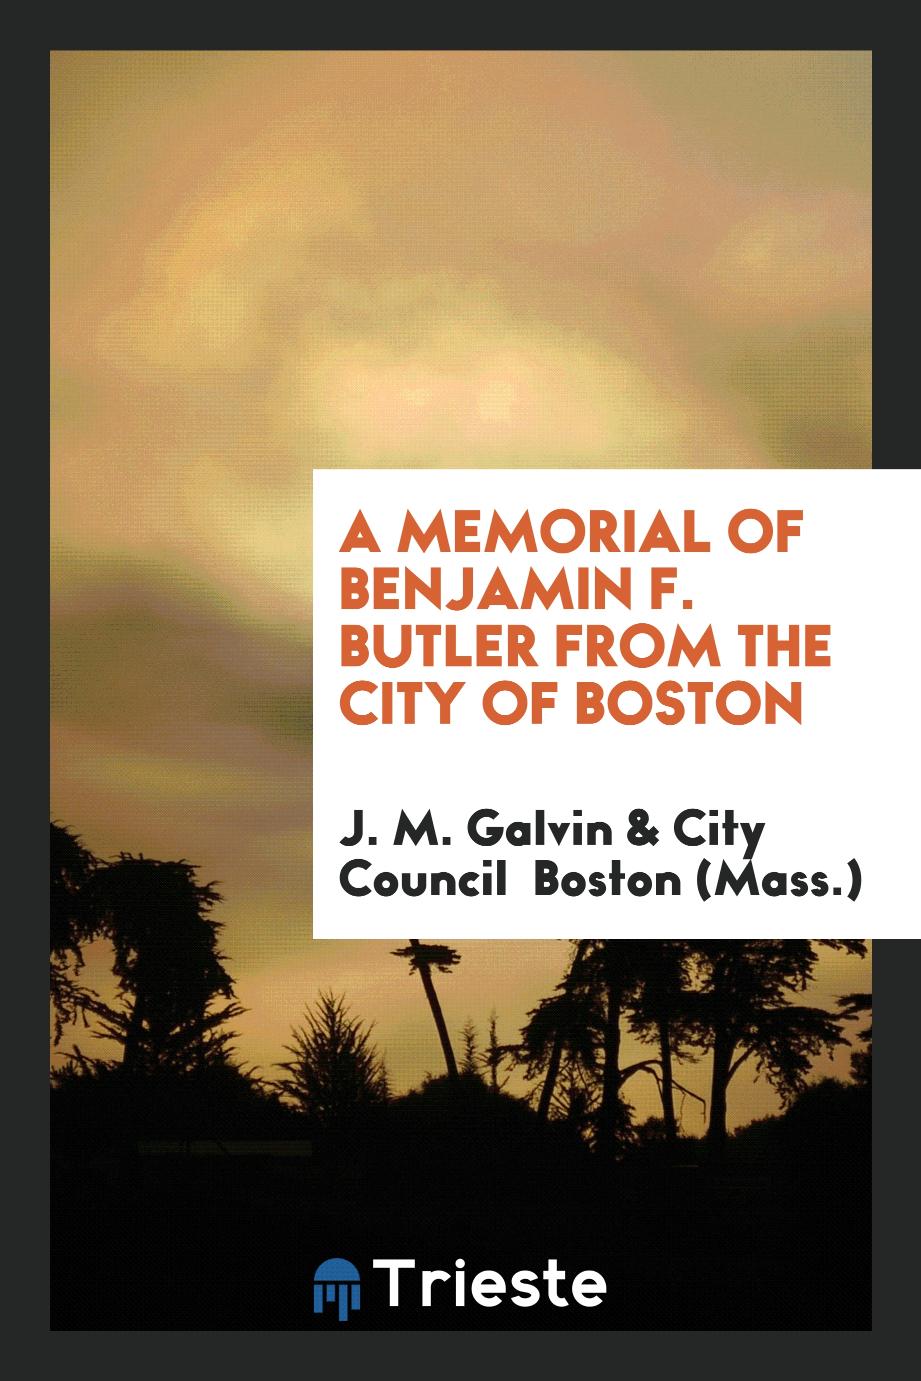 A Memorial of Benjamin F. Butler from the City of Boston